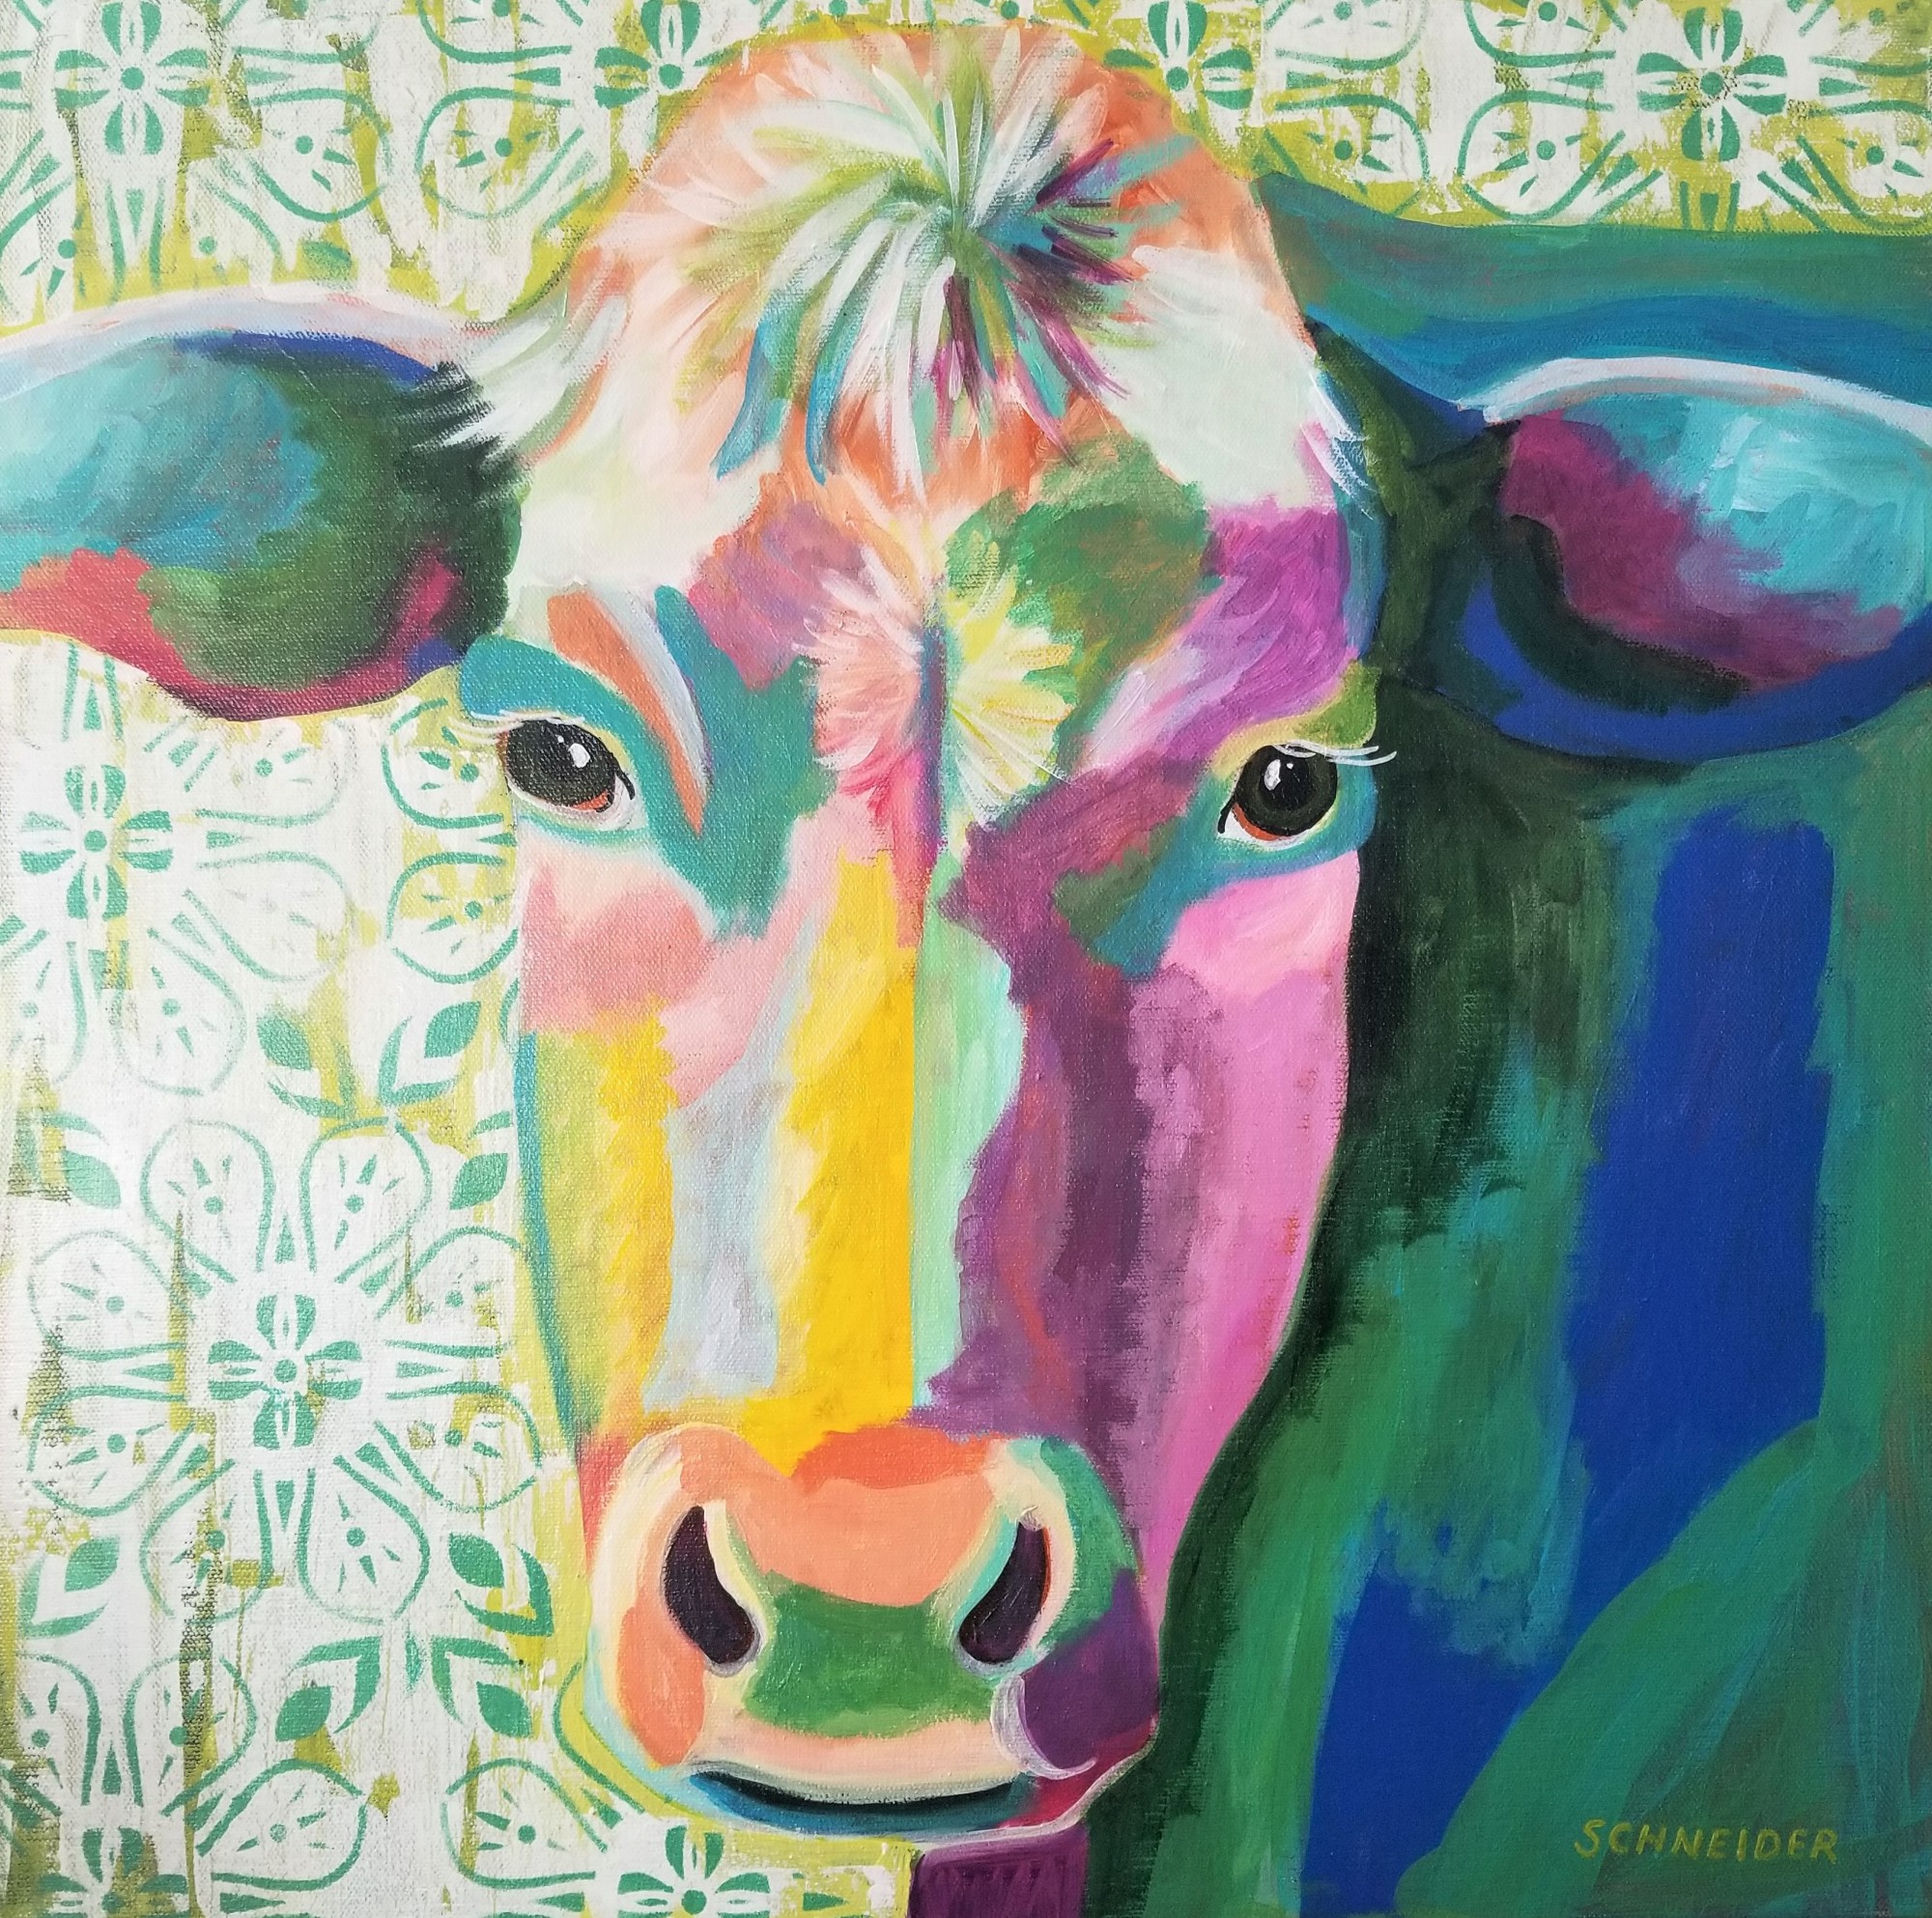 Jody Schneider said the most difficult part about painting Daisy the cow was figuring out the right colors to use. (Courtesy of Jody Schneider)